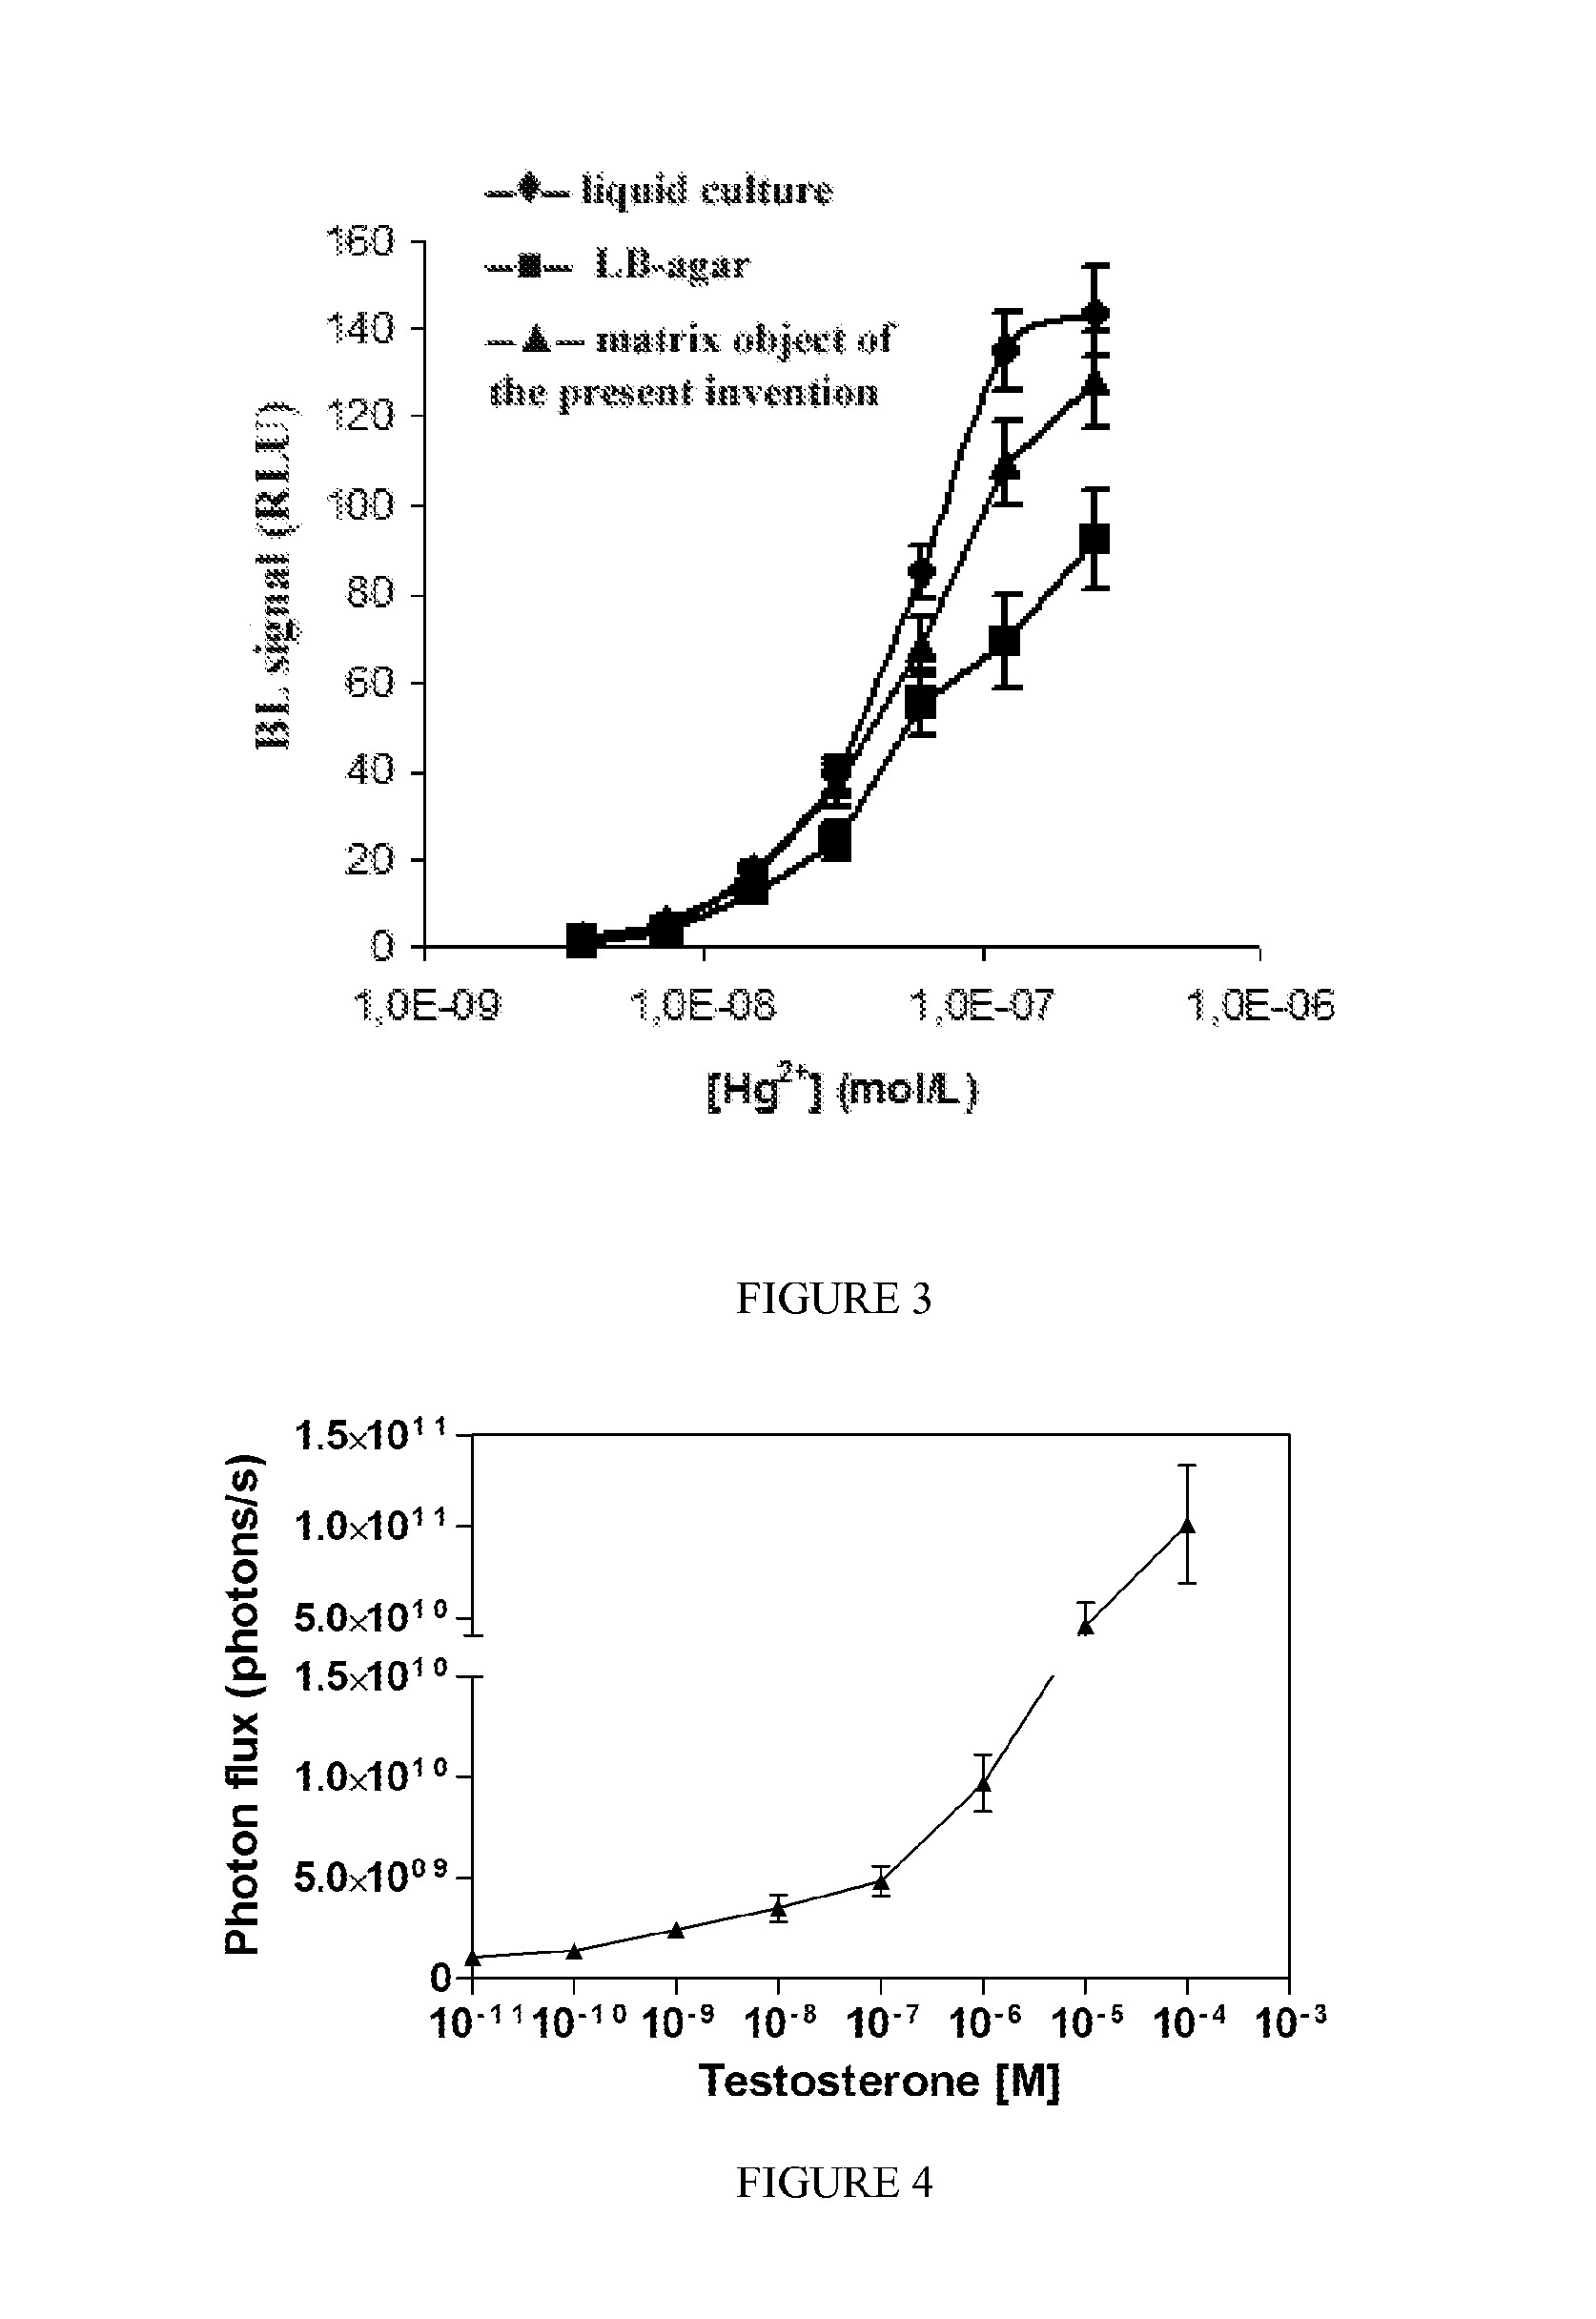 Portable device based on immobilized cells for the detection of analytes